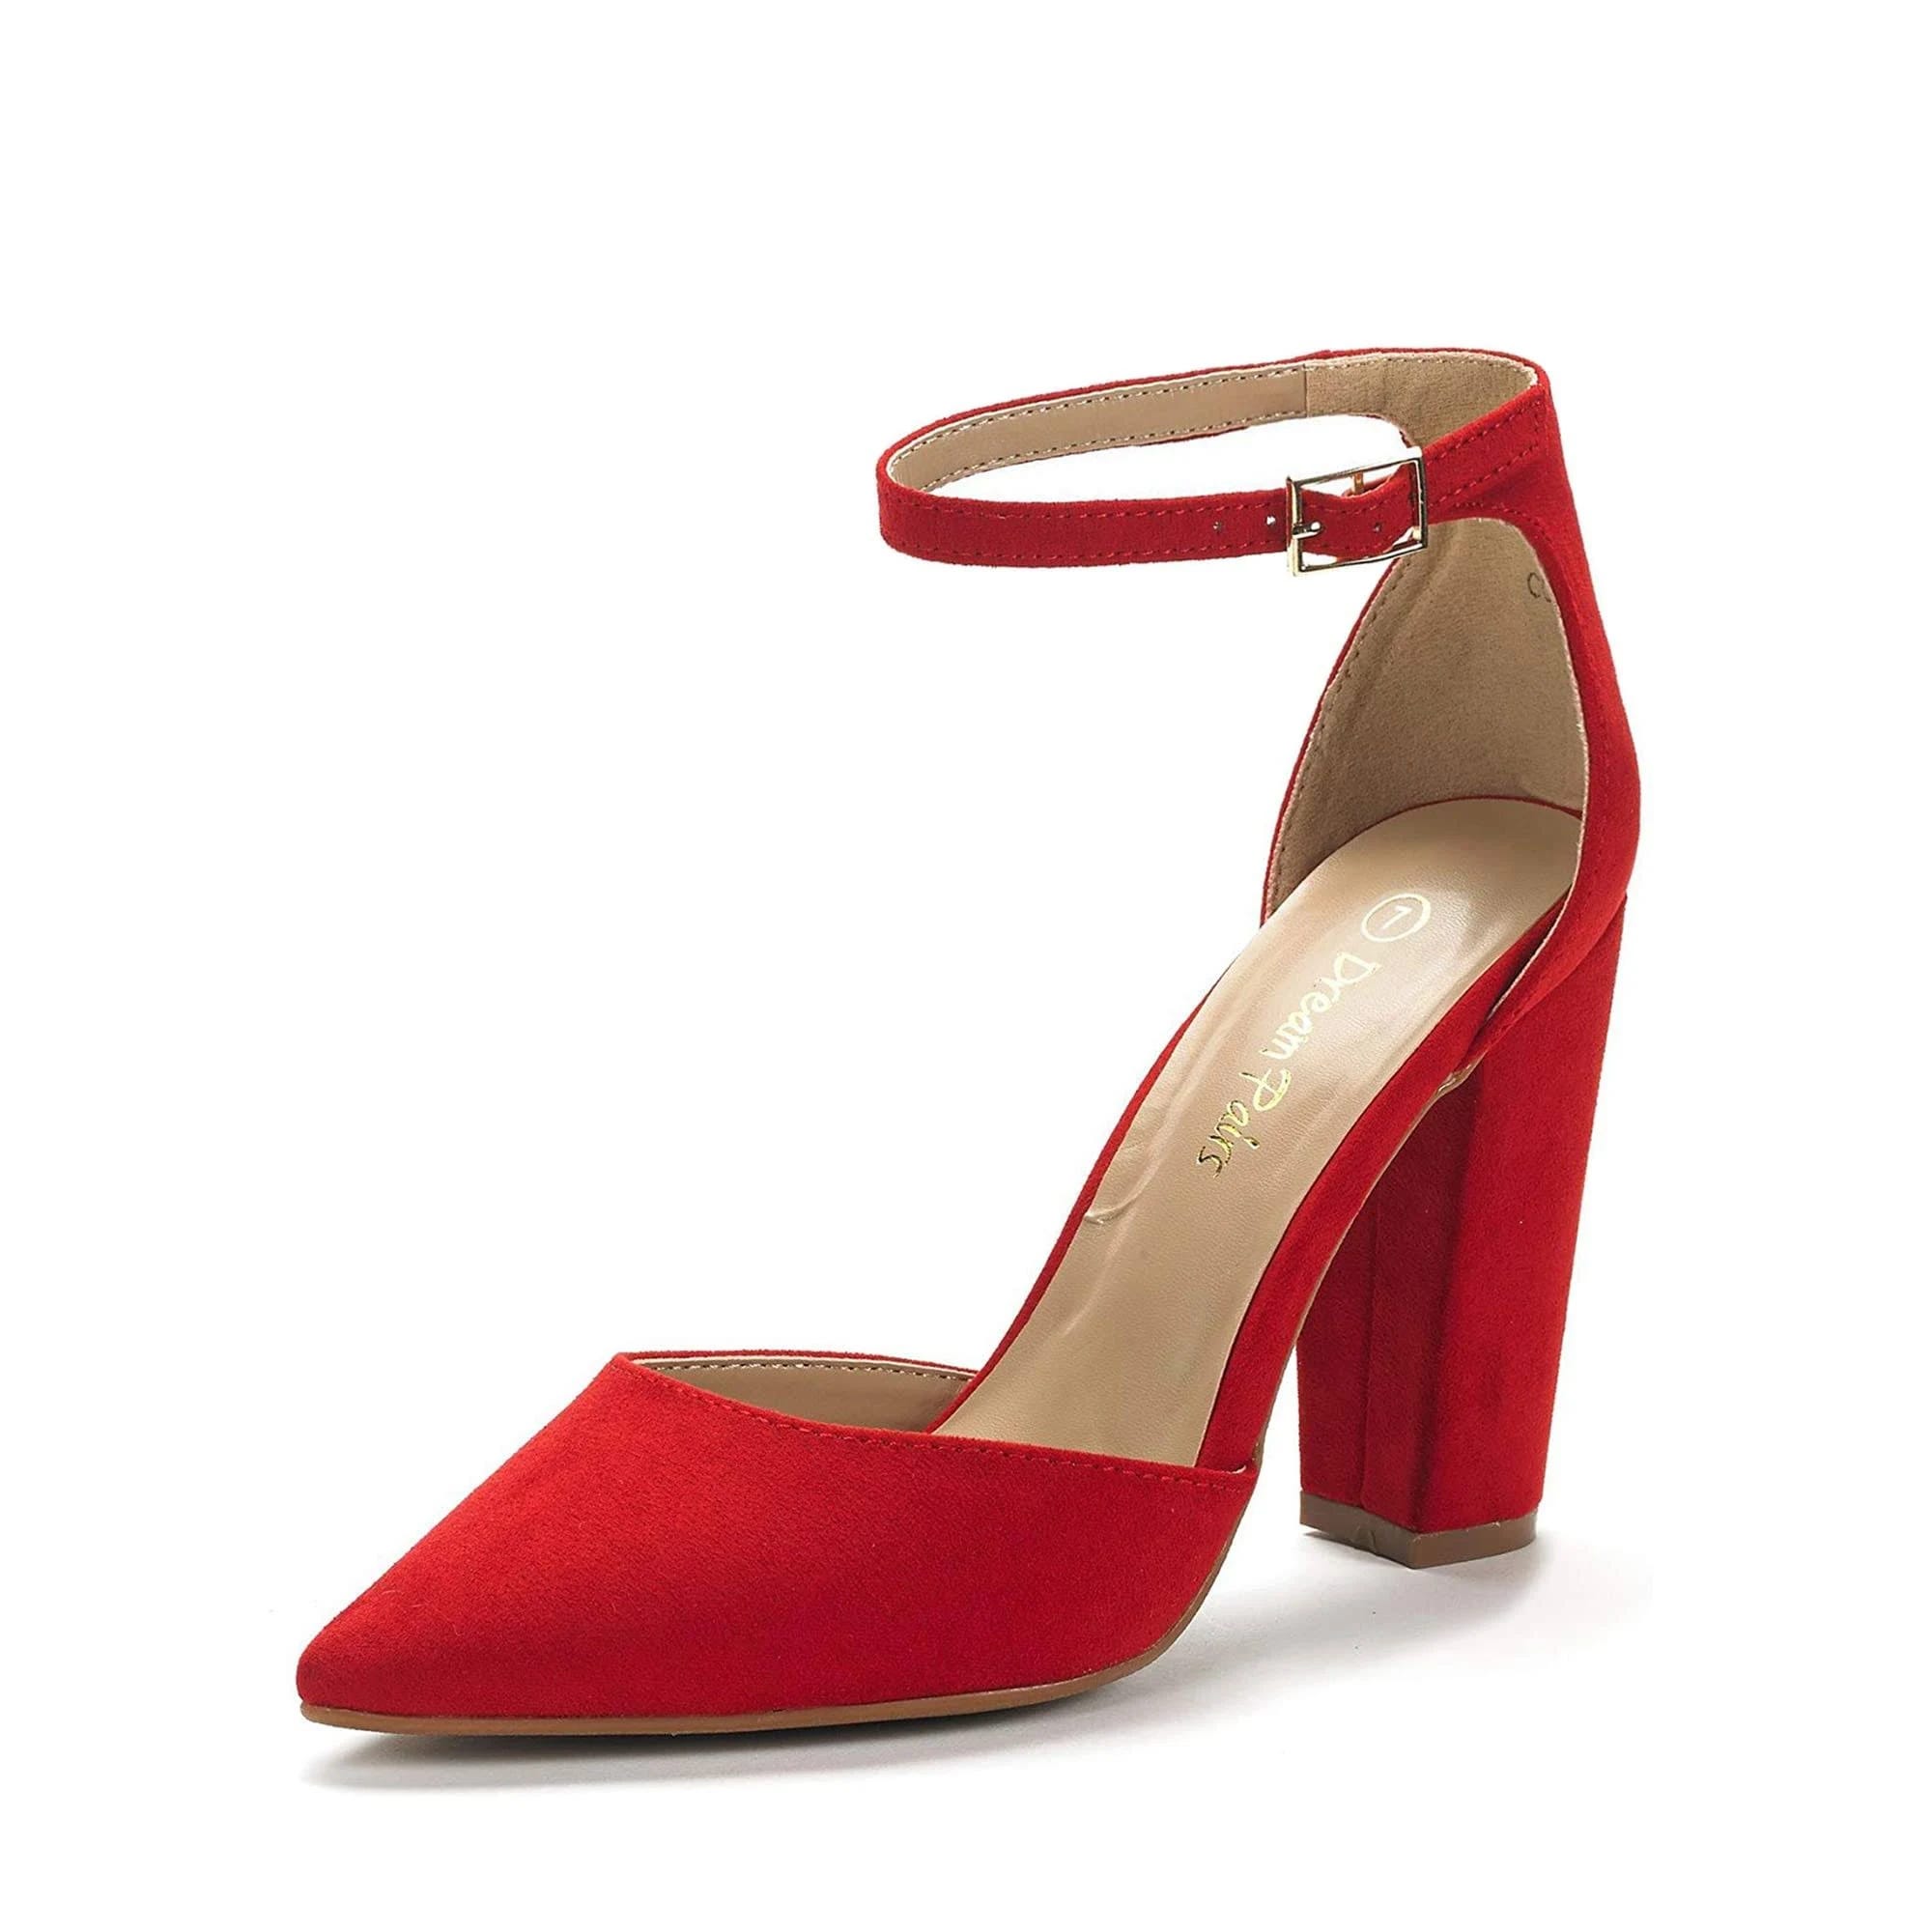 Comfortable Coco High Heel Pump - Adjustable Strap and Padded Insole | Image